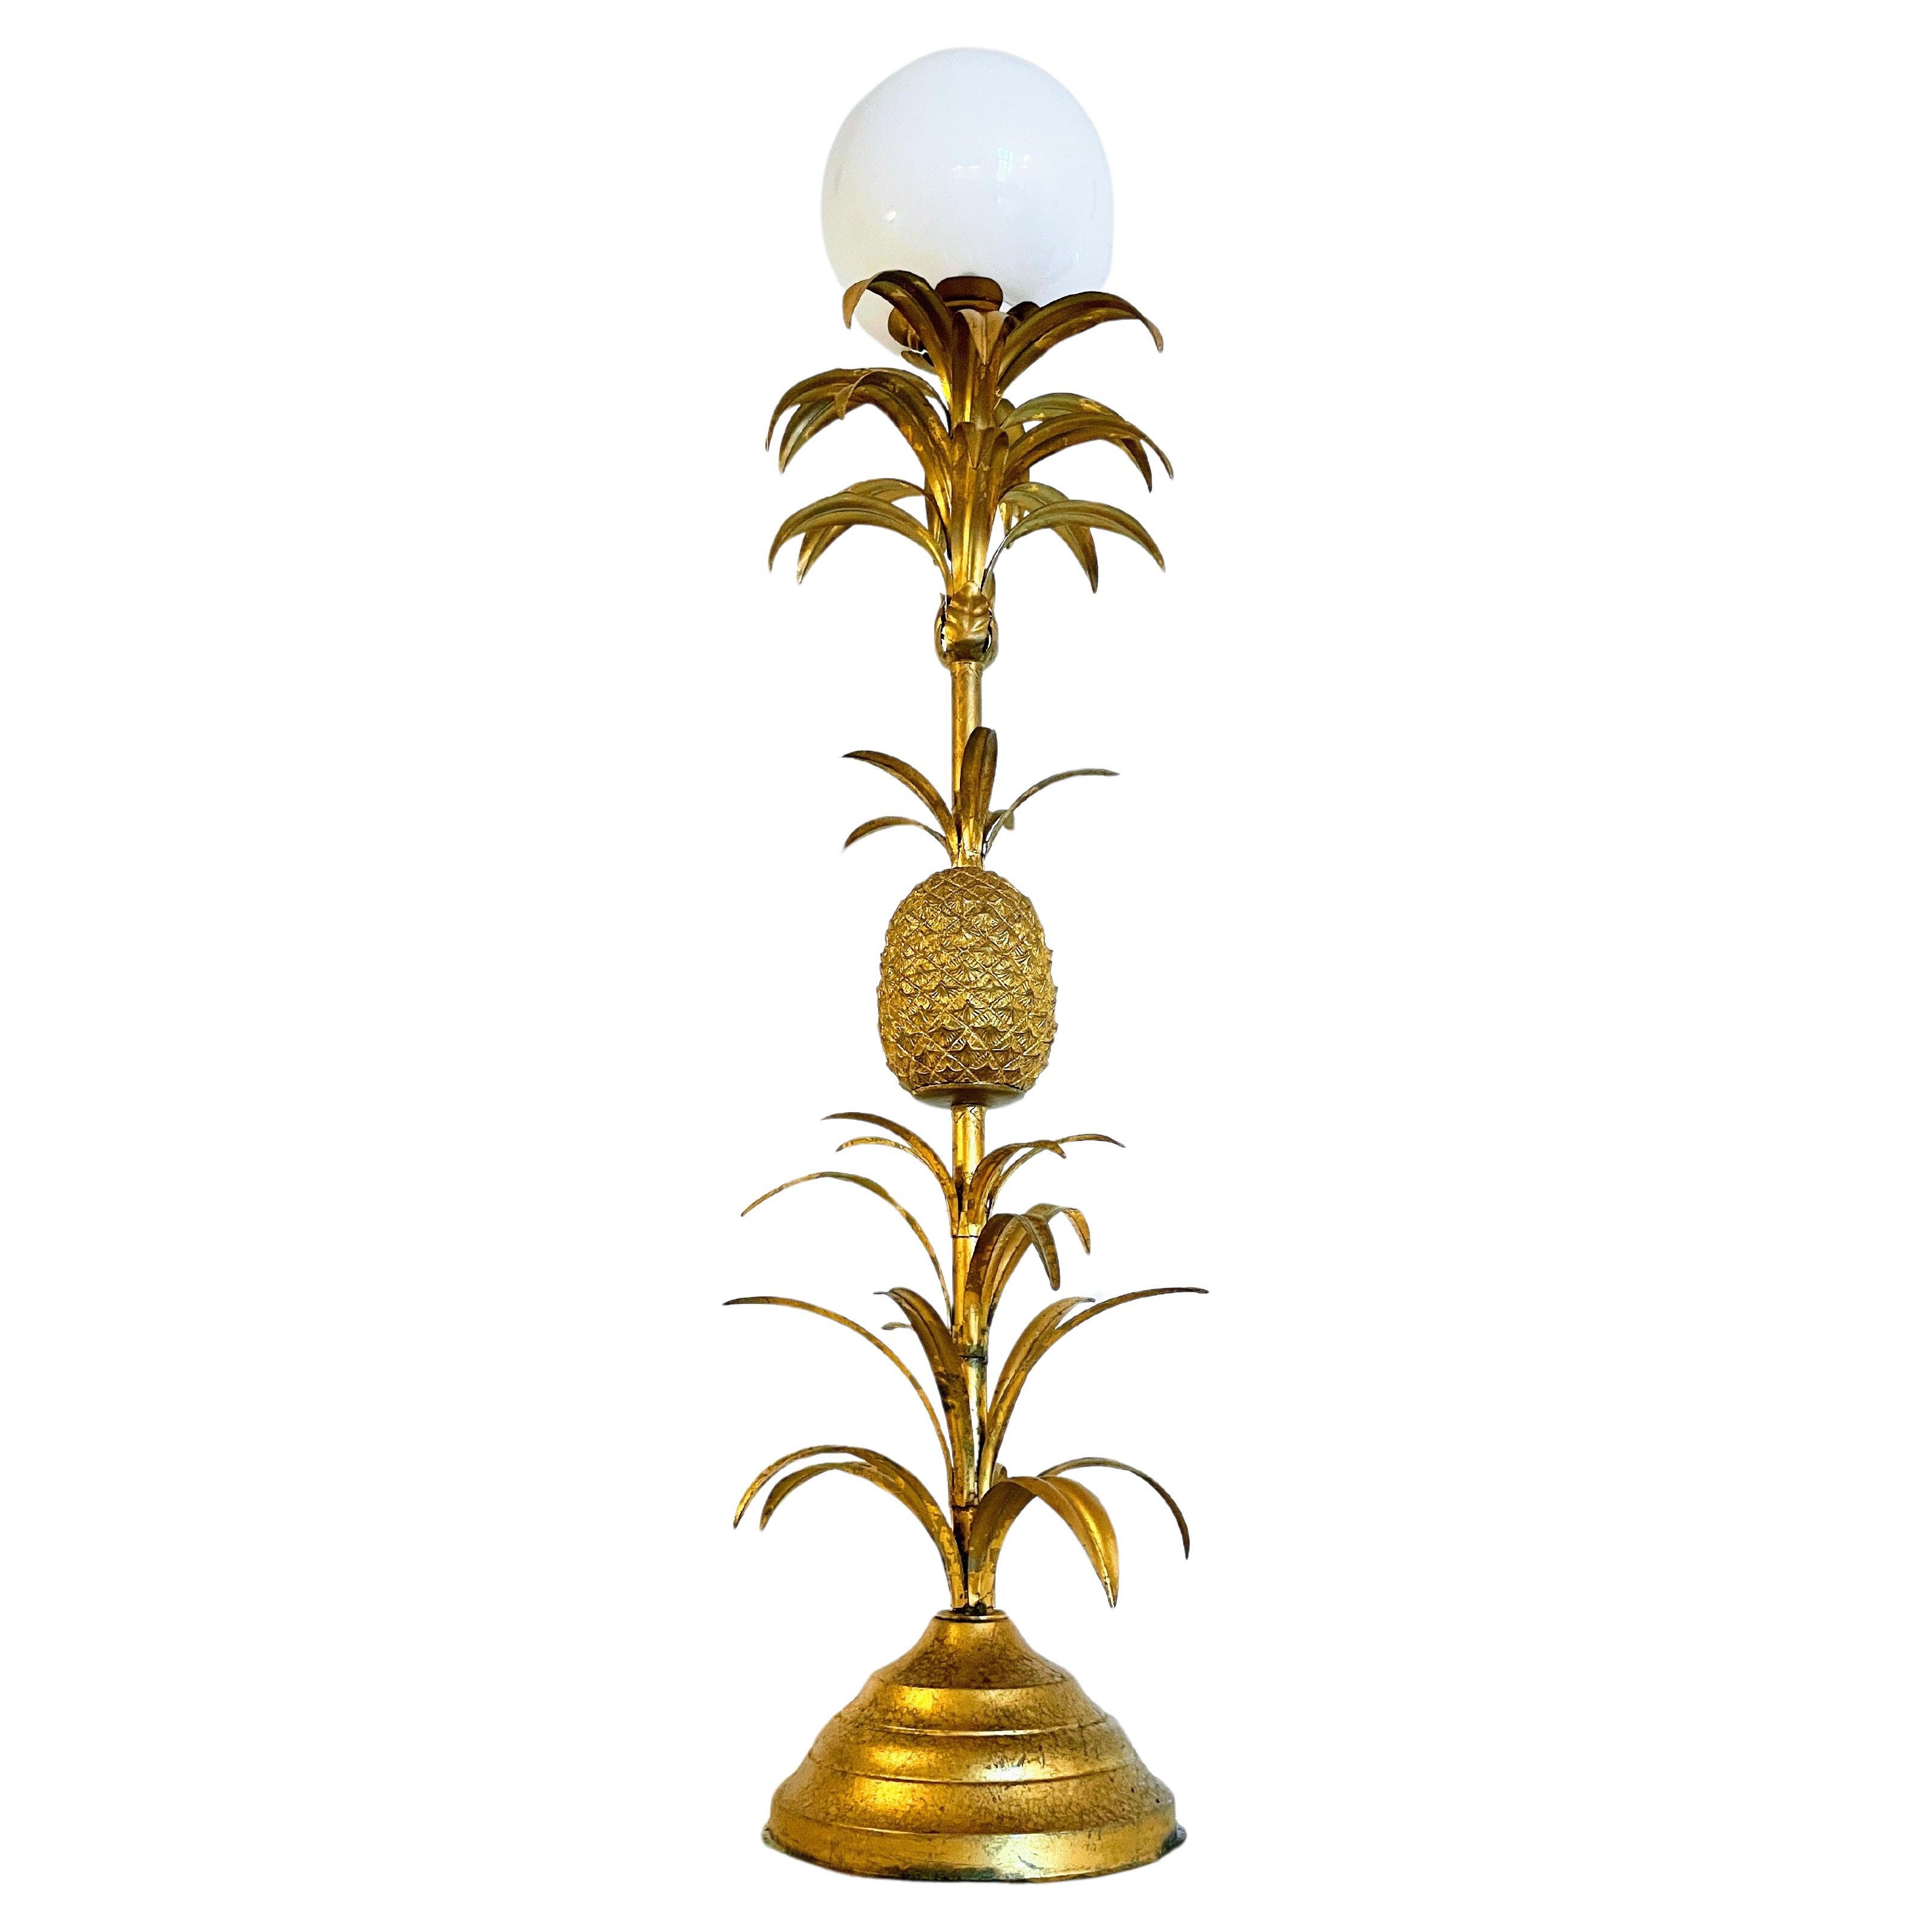 Large, luxurious floor lamp with a pineapple made of gilded metal and glass